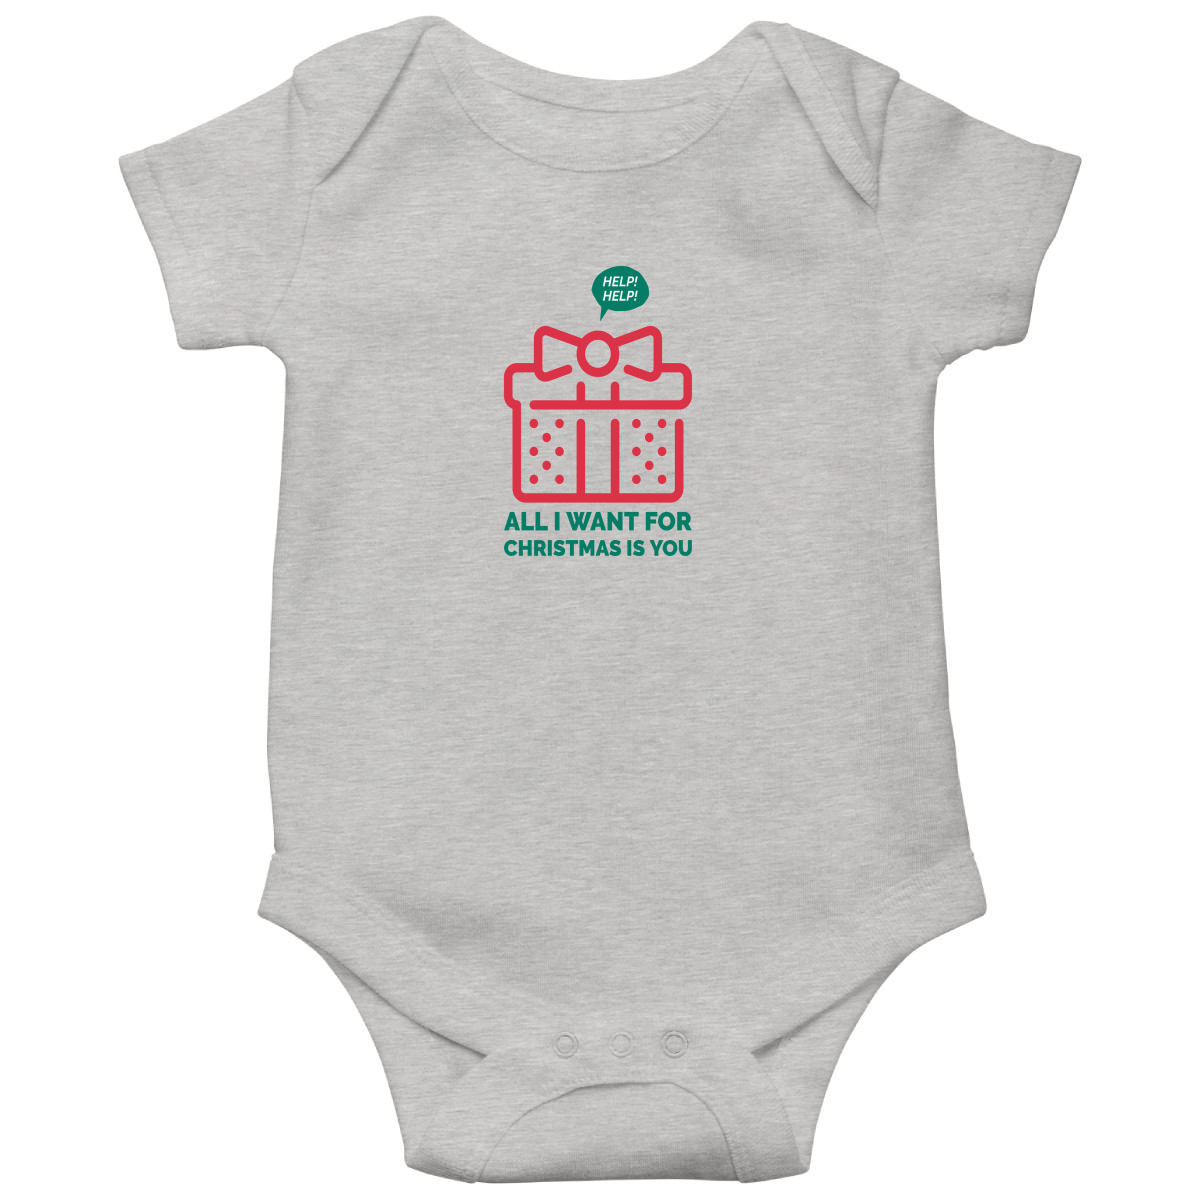 All I Want For Christmas Is You Baby Bodysuits